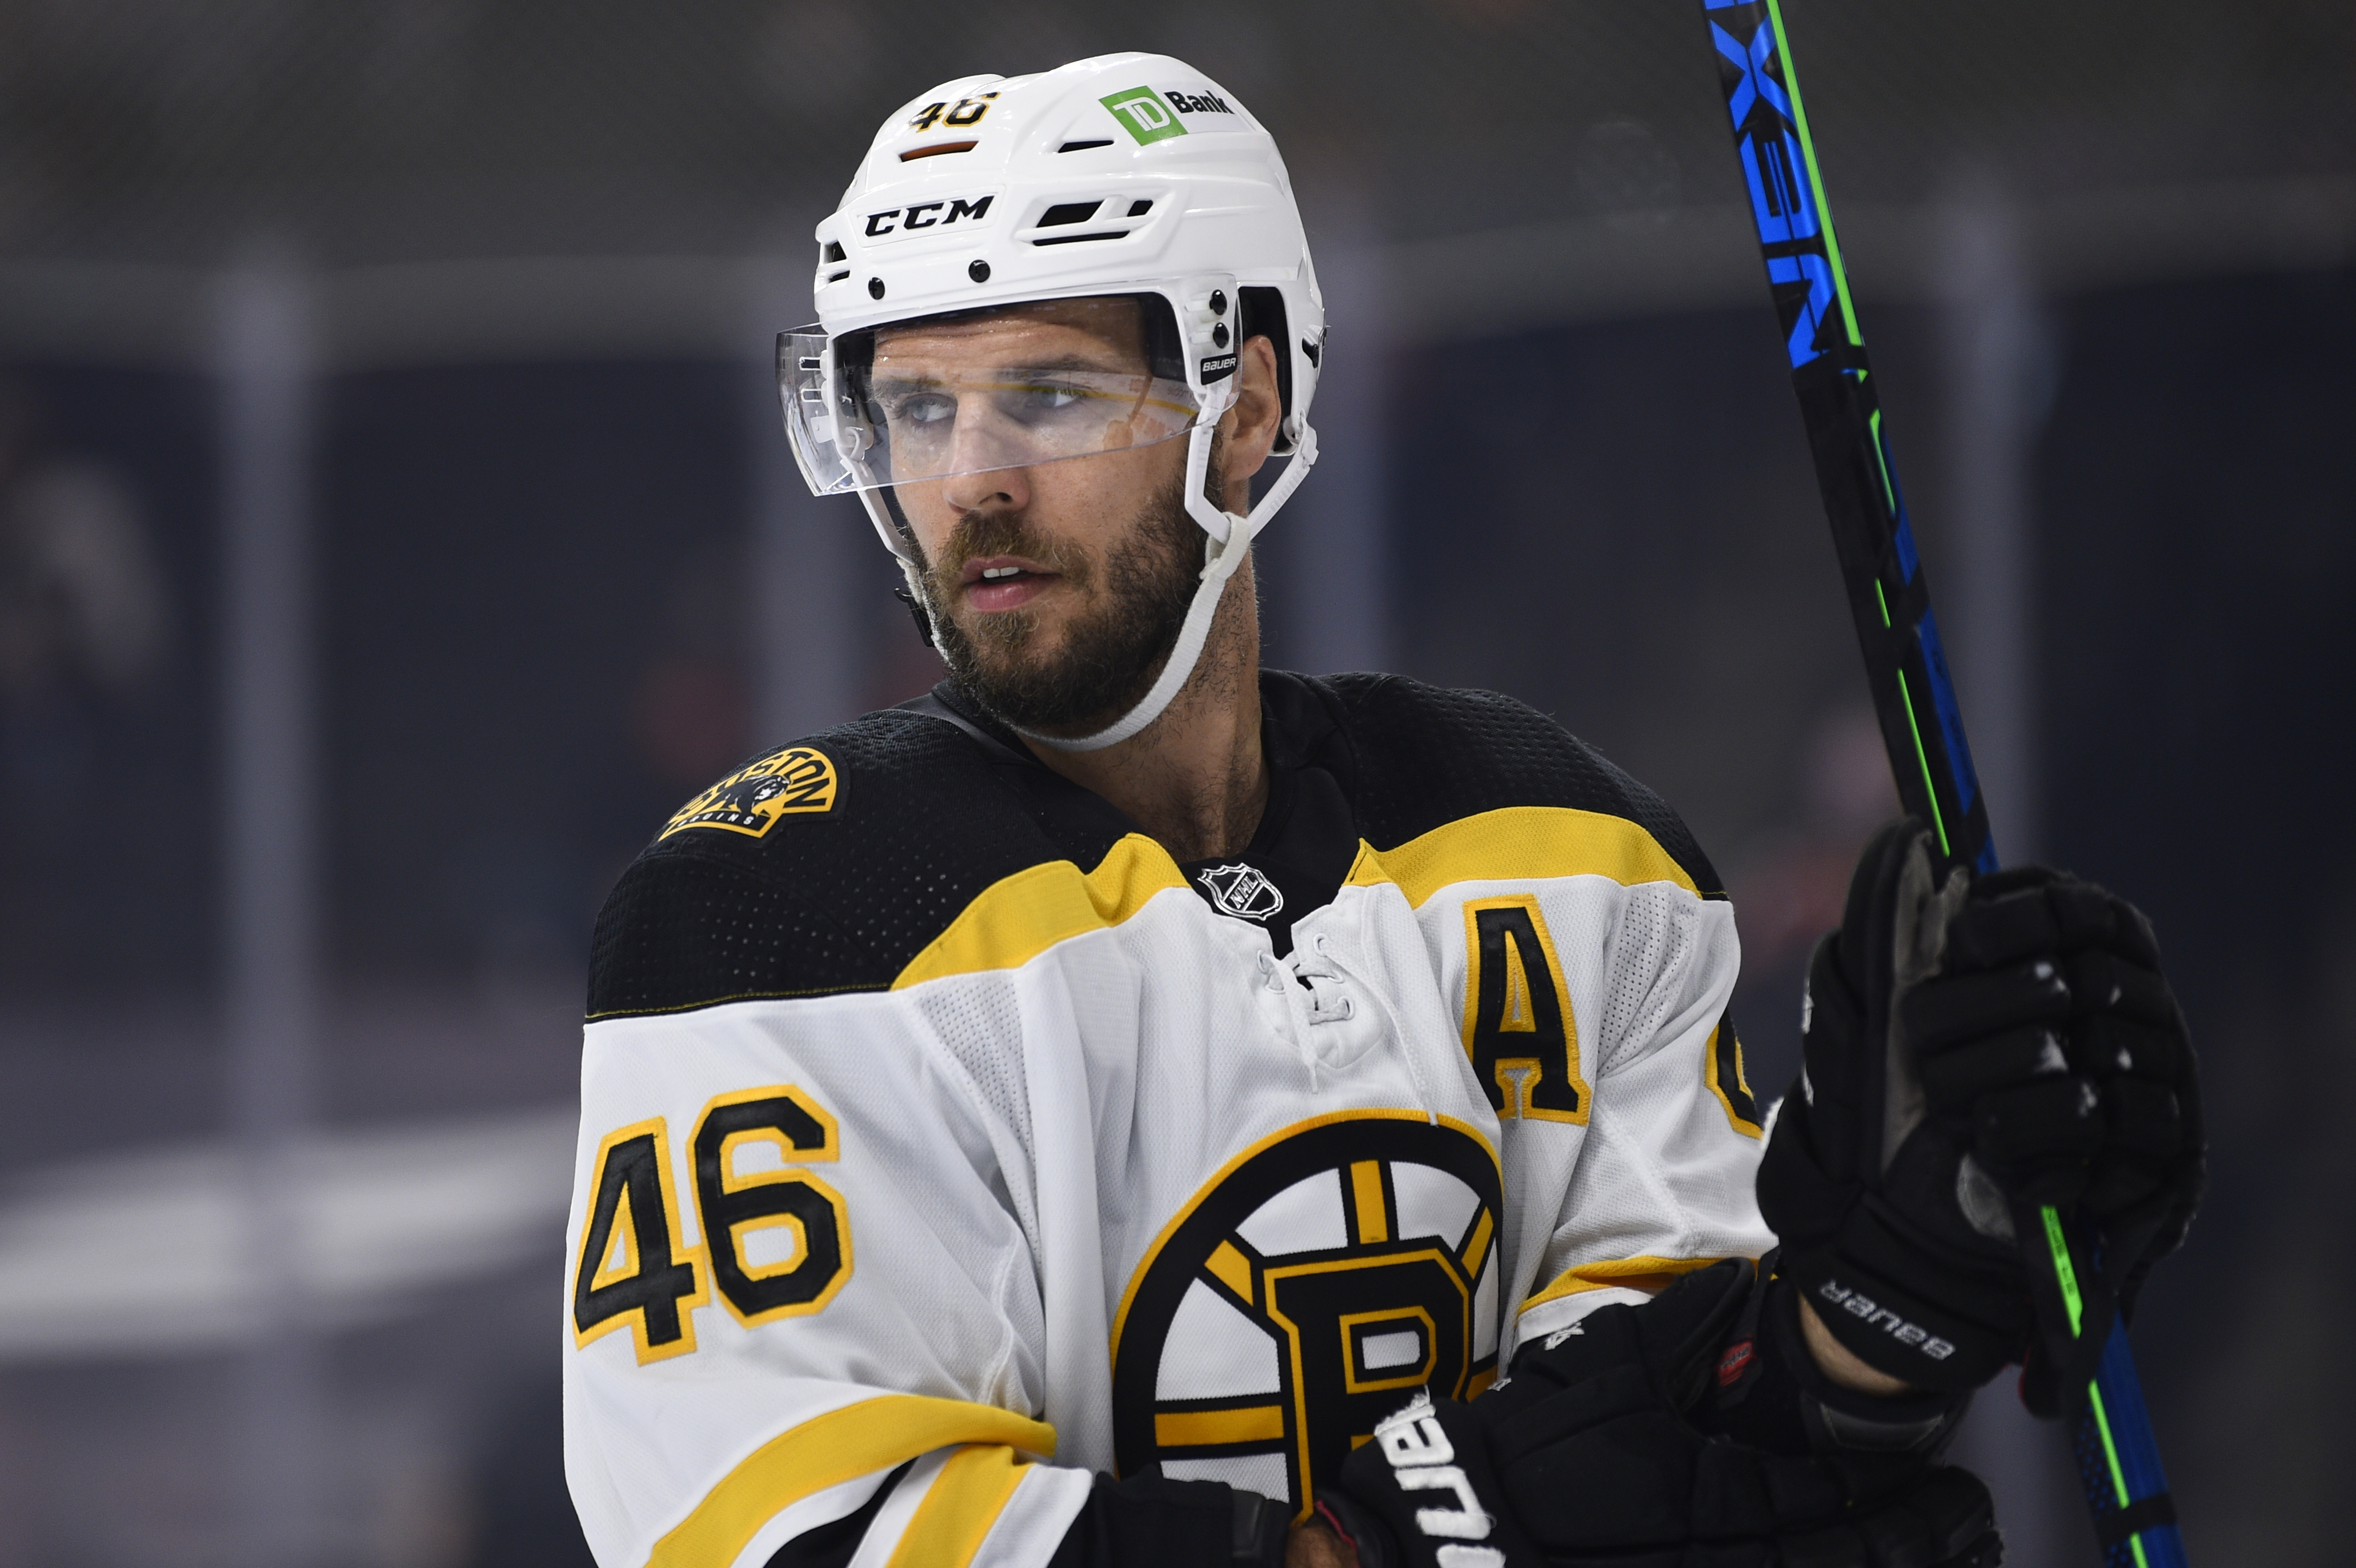 David Krejci ruled out a spring return to Boston in his introductory press conference back in the Czech Republic.